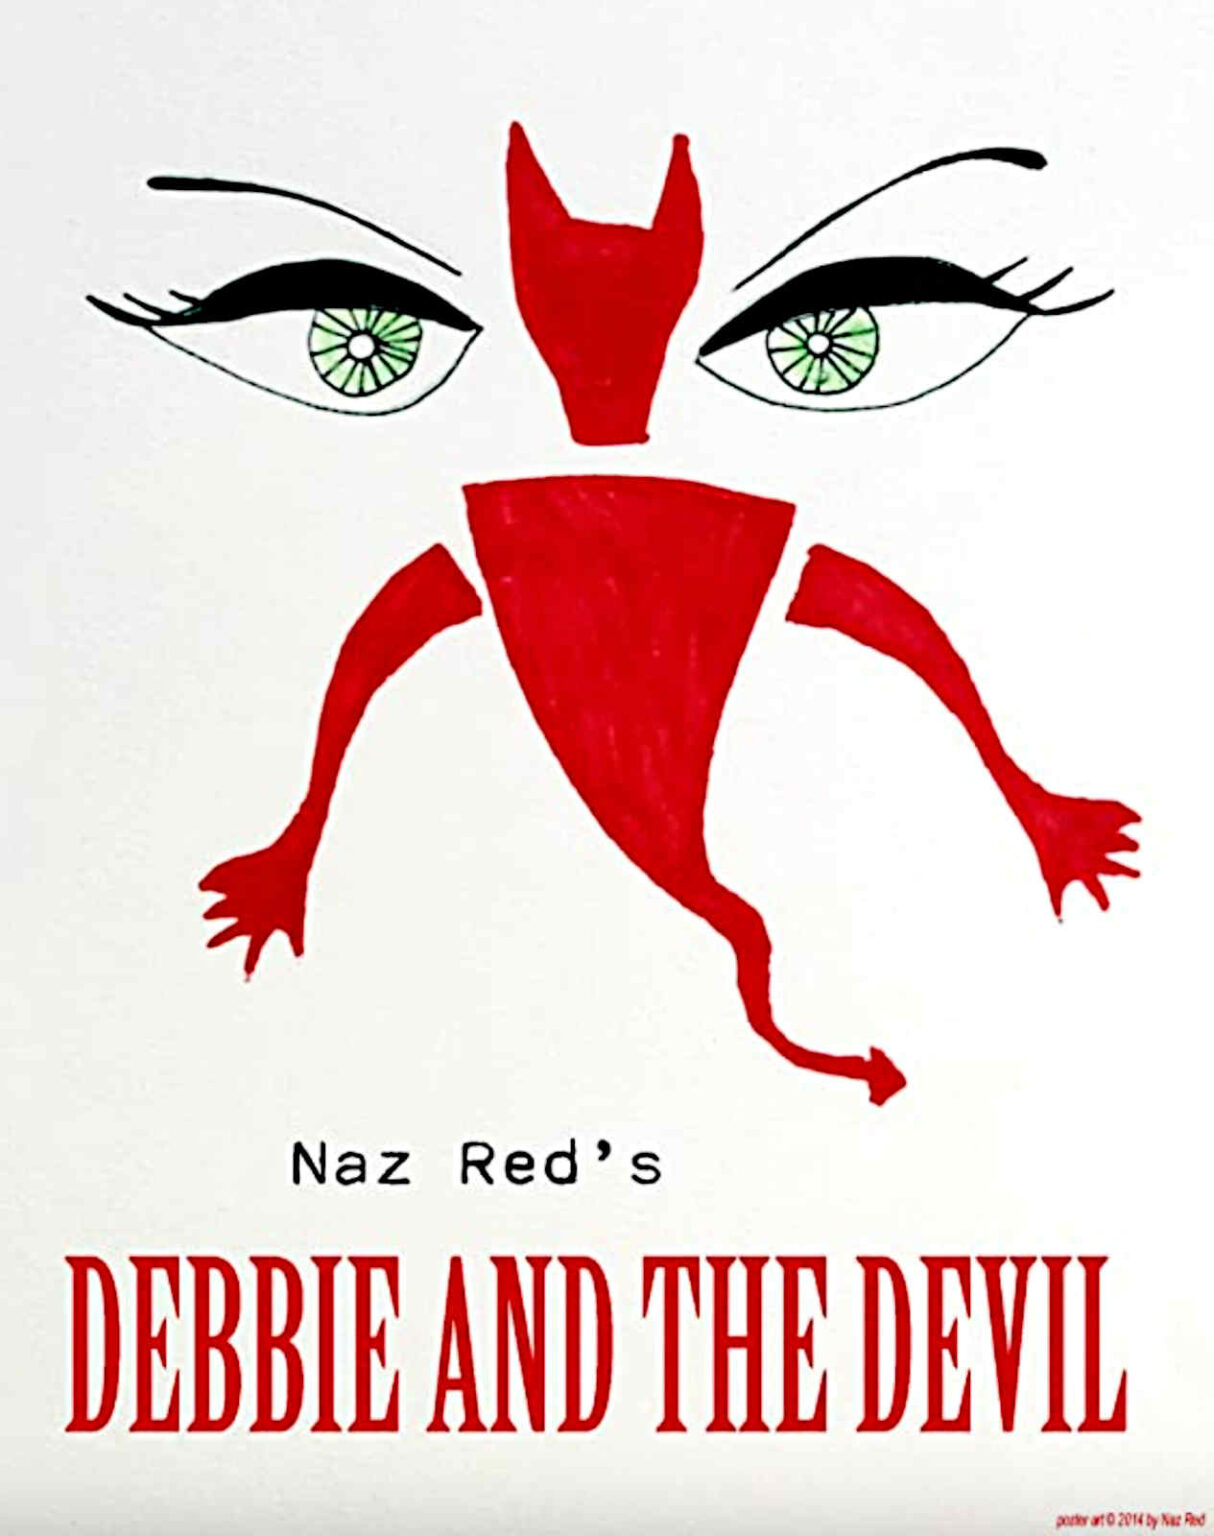 Join the cast of 'Debbie and the Devil' for a devil of a good time with a wickedly smart comedy horror about a girl just looking for a night on the town!